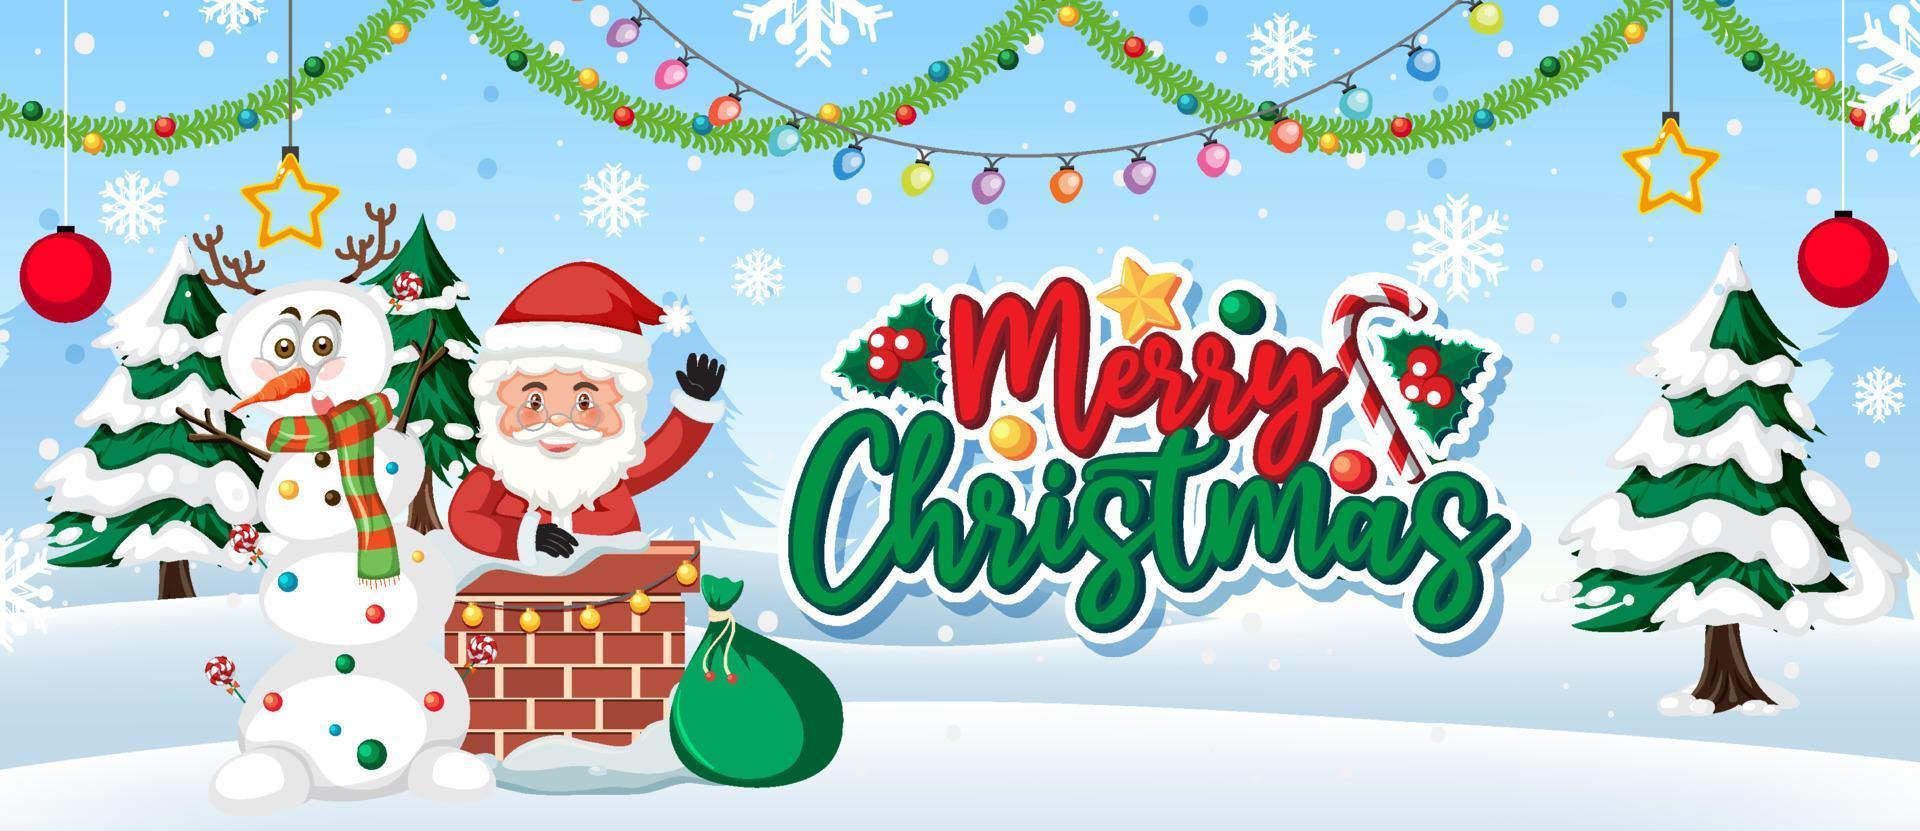 Merry Christmas text banner with Santa Claus background vector